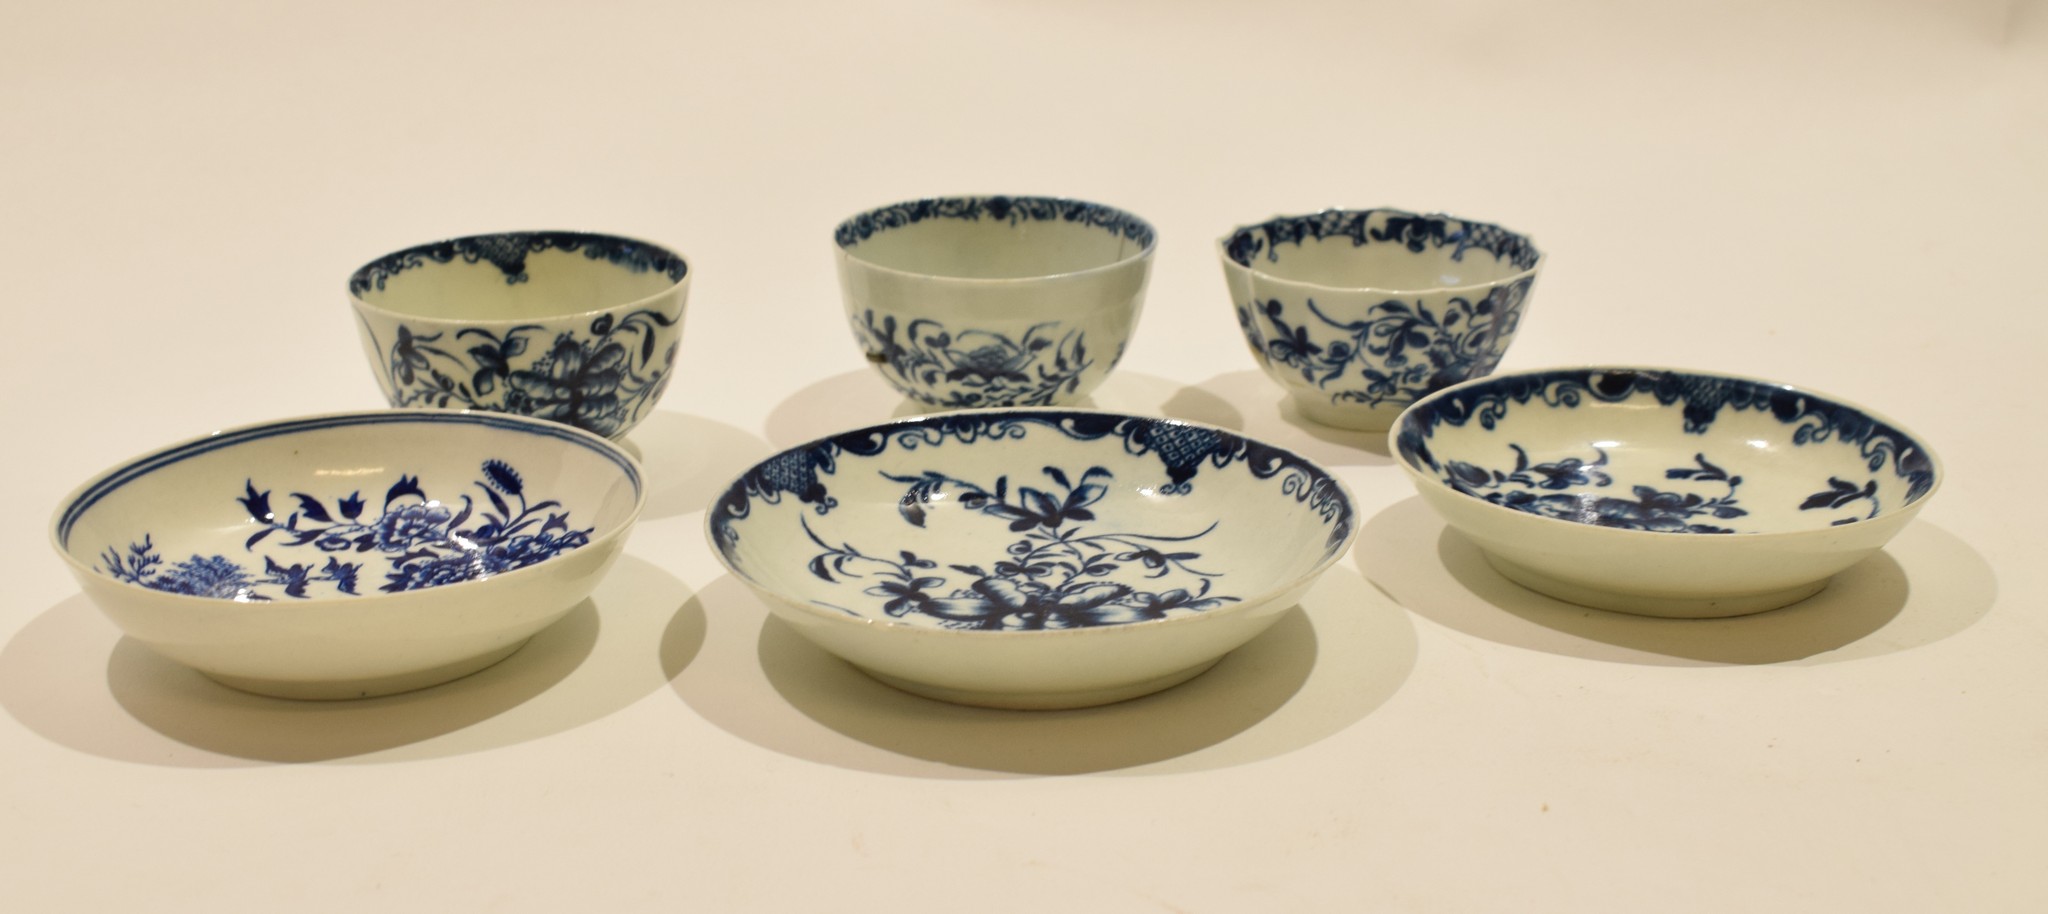 Collection of 18th century Worcester porcelain tea bowls and saucers including one with the Hollow